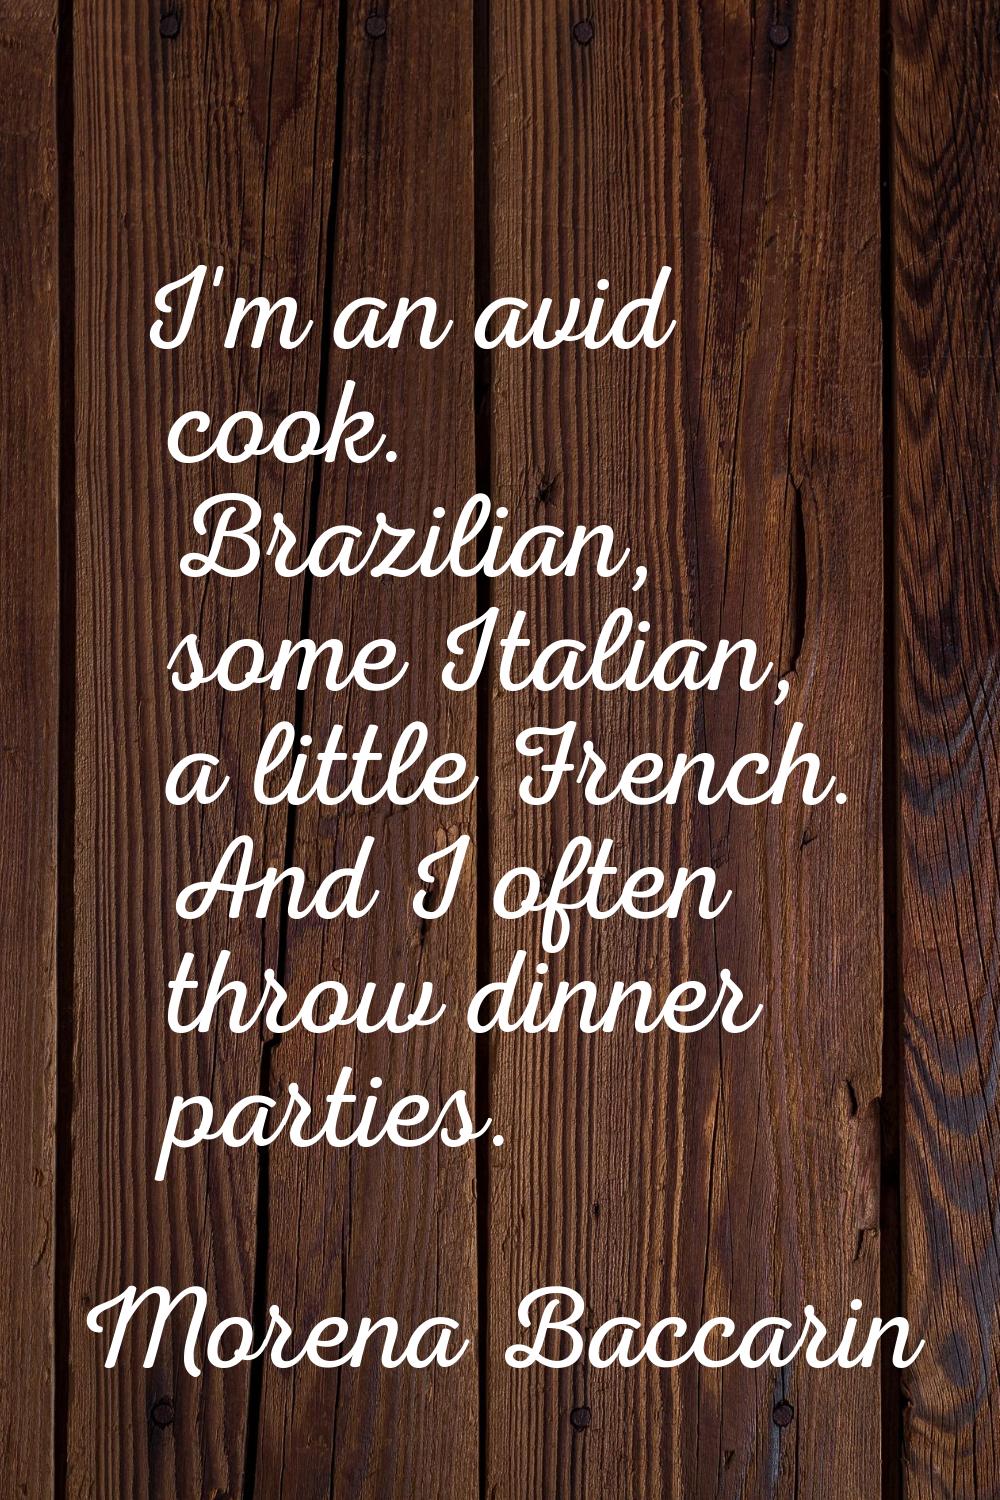 I'm an avid cook. Brazilian, some Italian, a little French. And I often throw dinner parties.